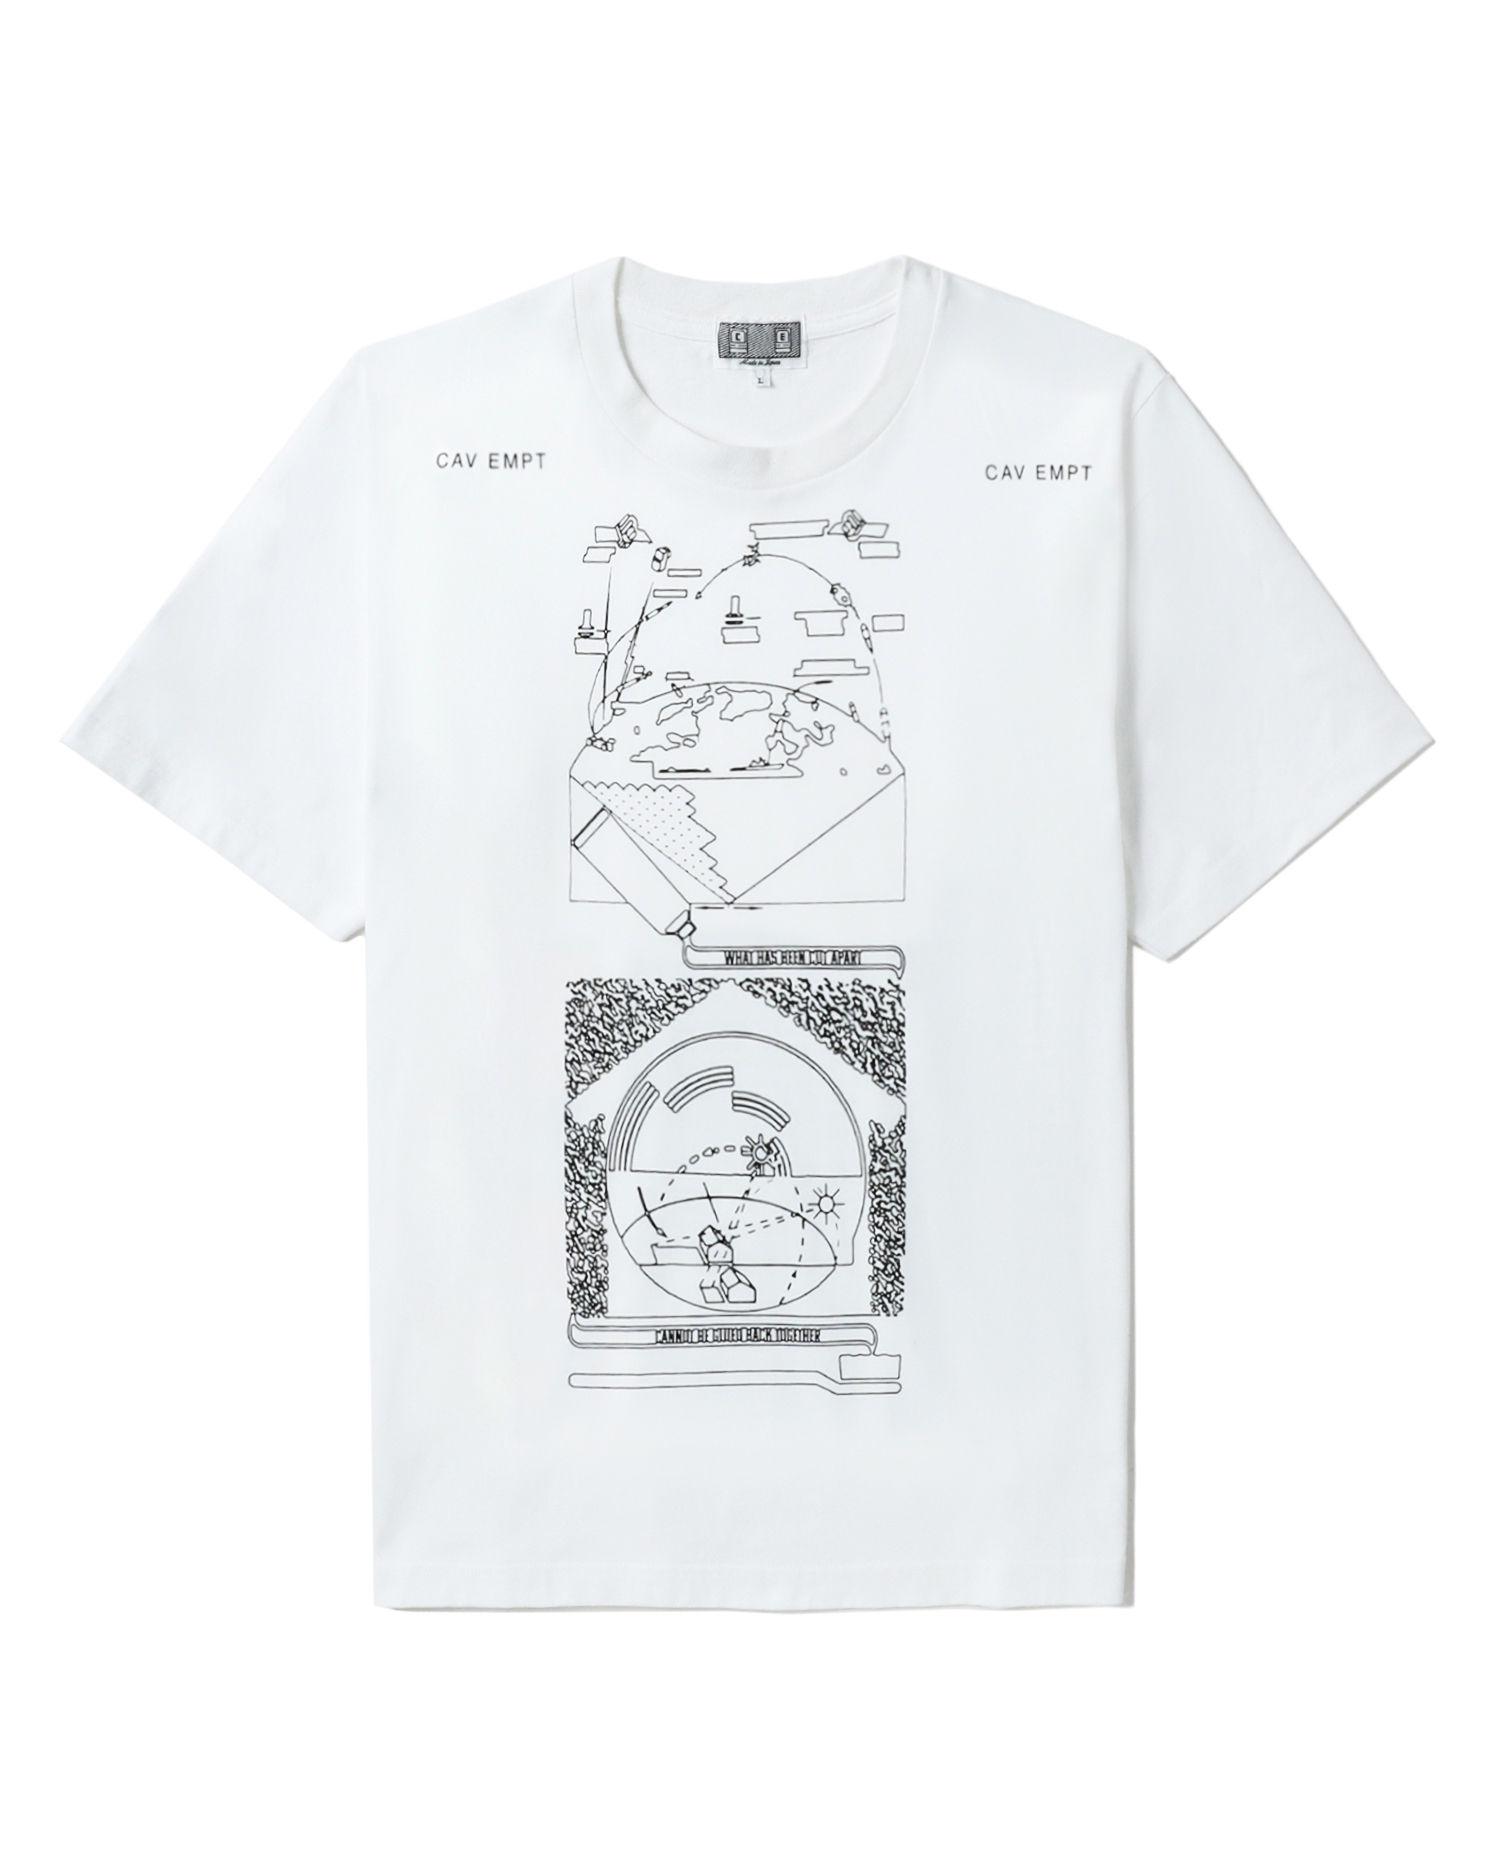 Graphic tee by CAV EMPT